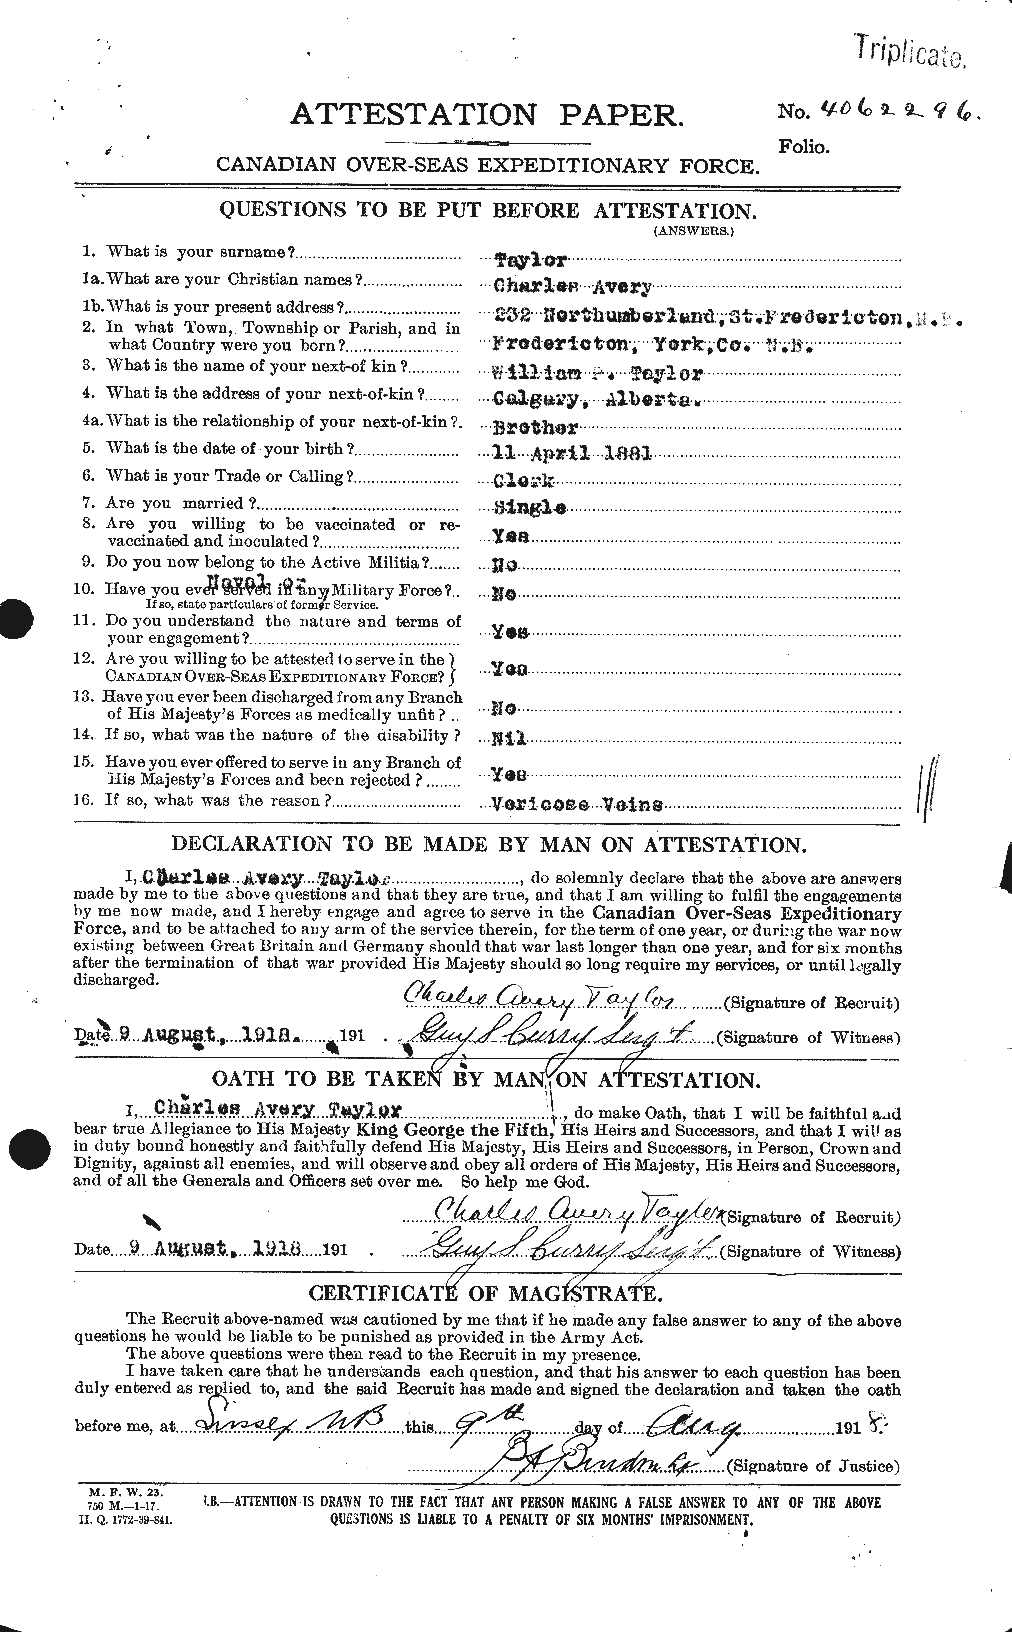 Personnel Records of the First World War - CEF 626829a